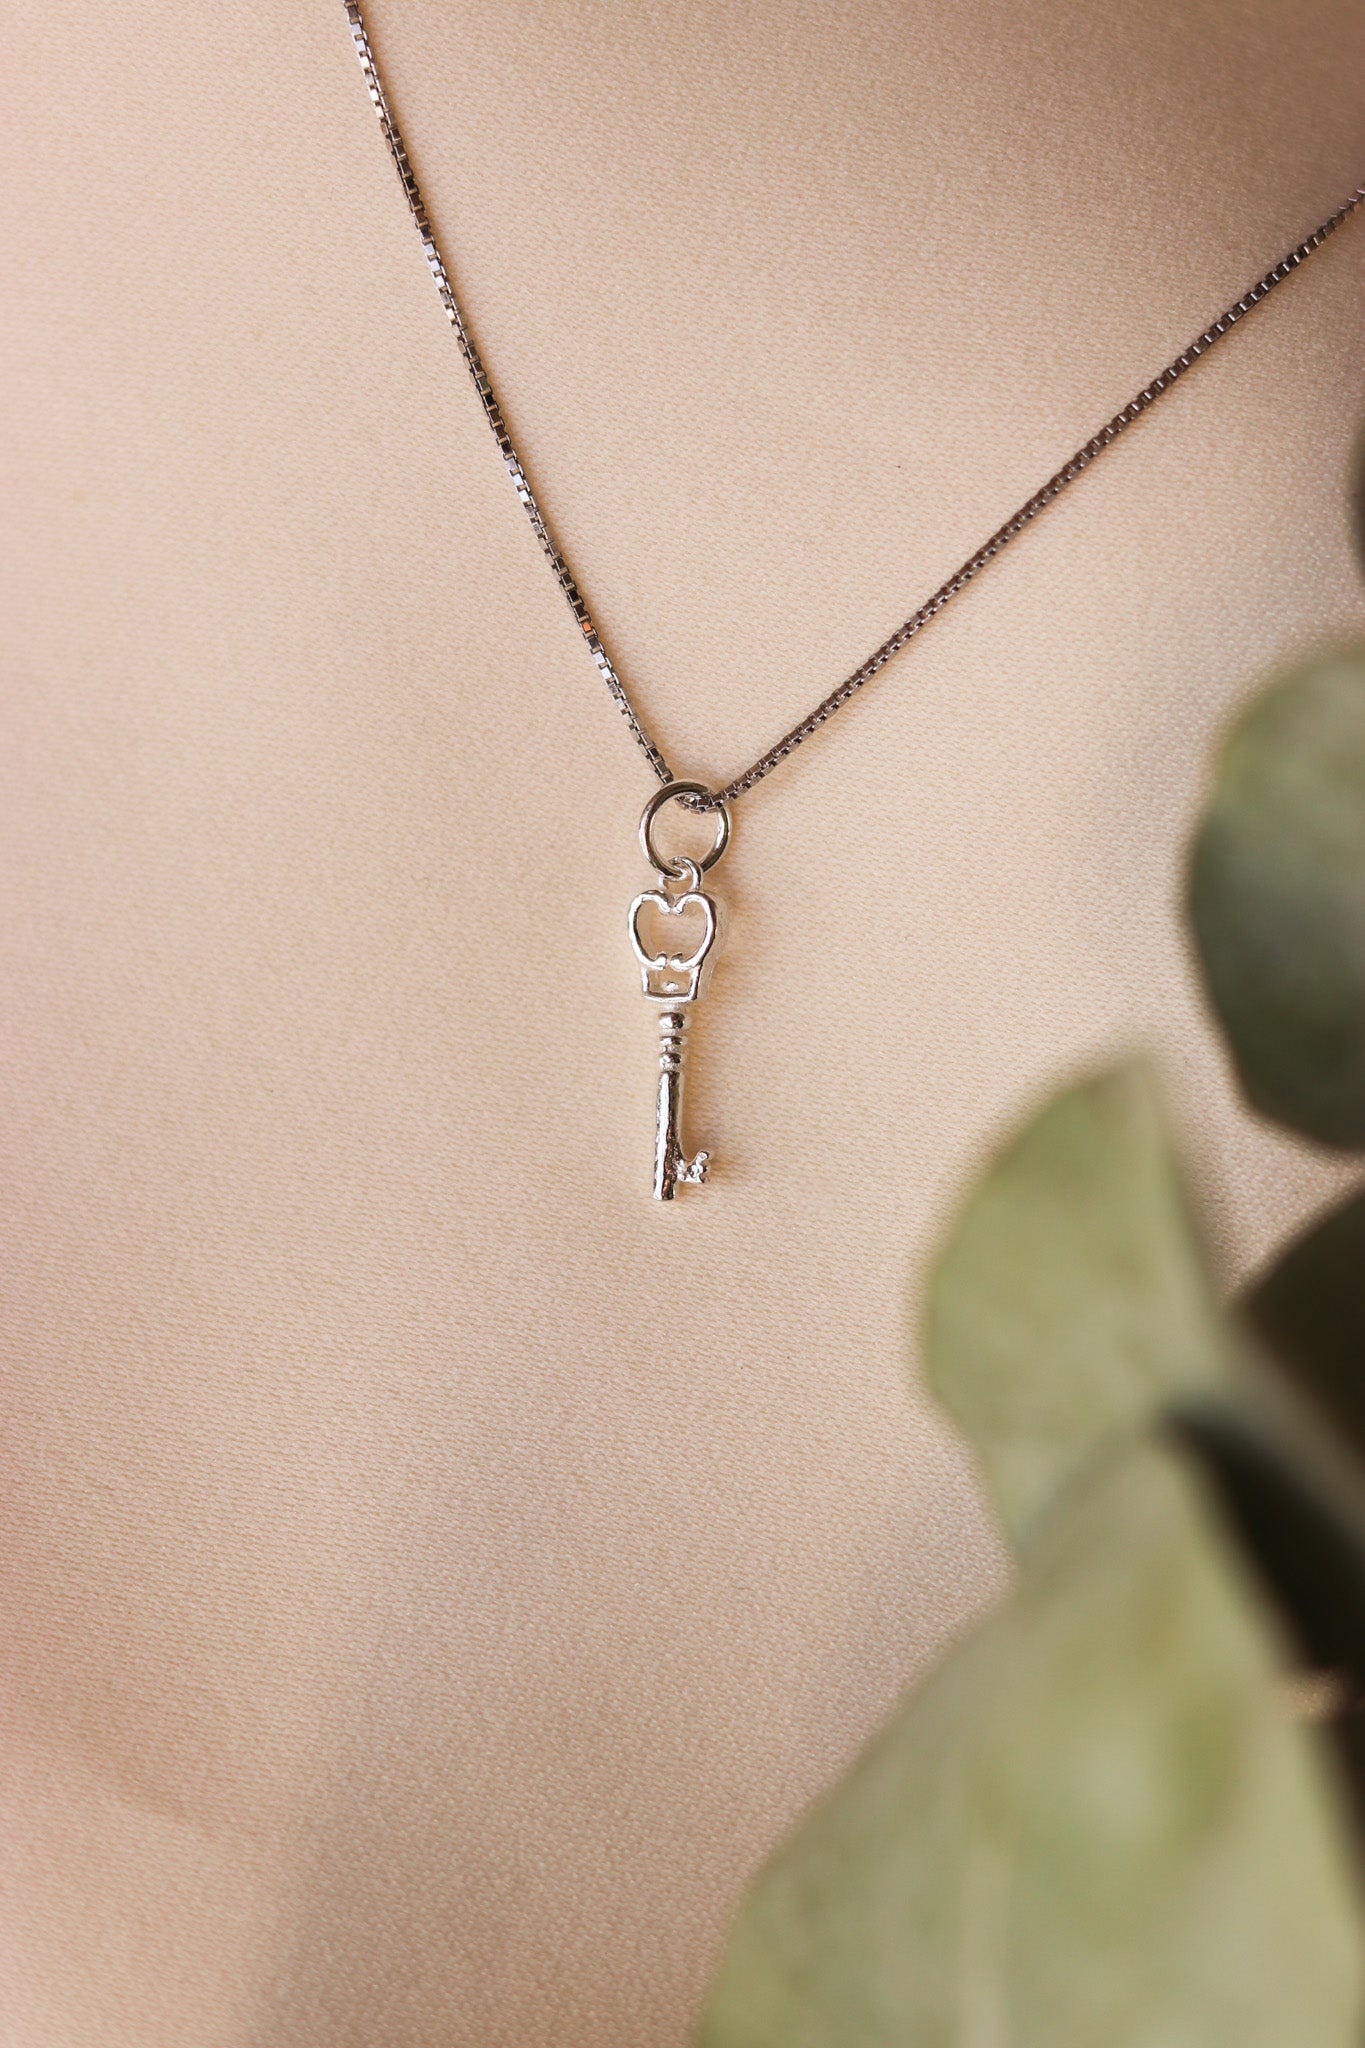 Palestinian right of return small key necklace